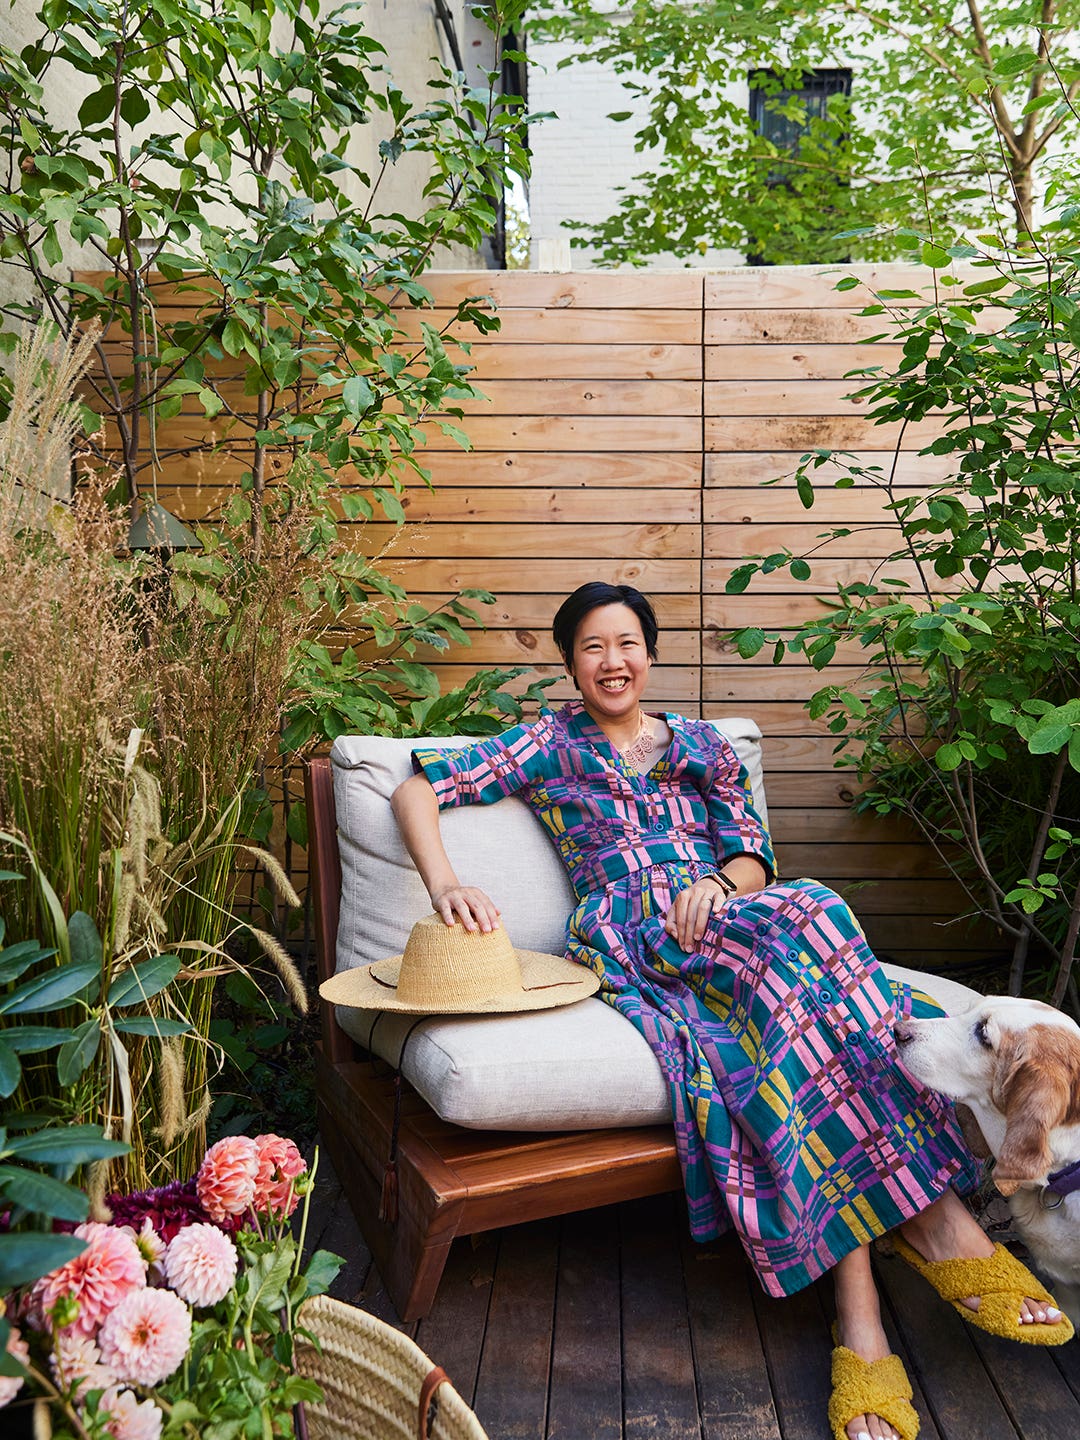 This Brownstone’s Backyard Welcomes Year-Round Foliage and Hides the Compost Bin